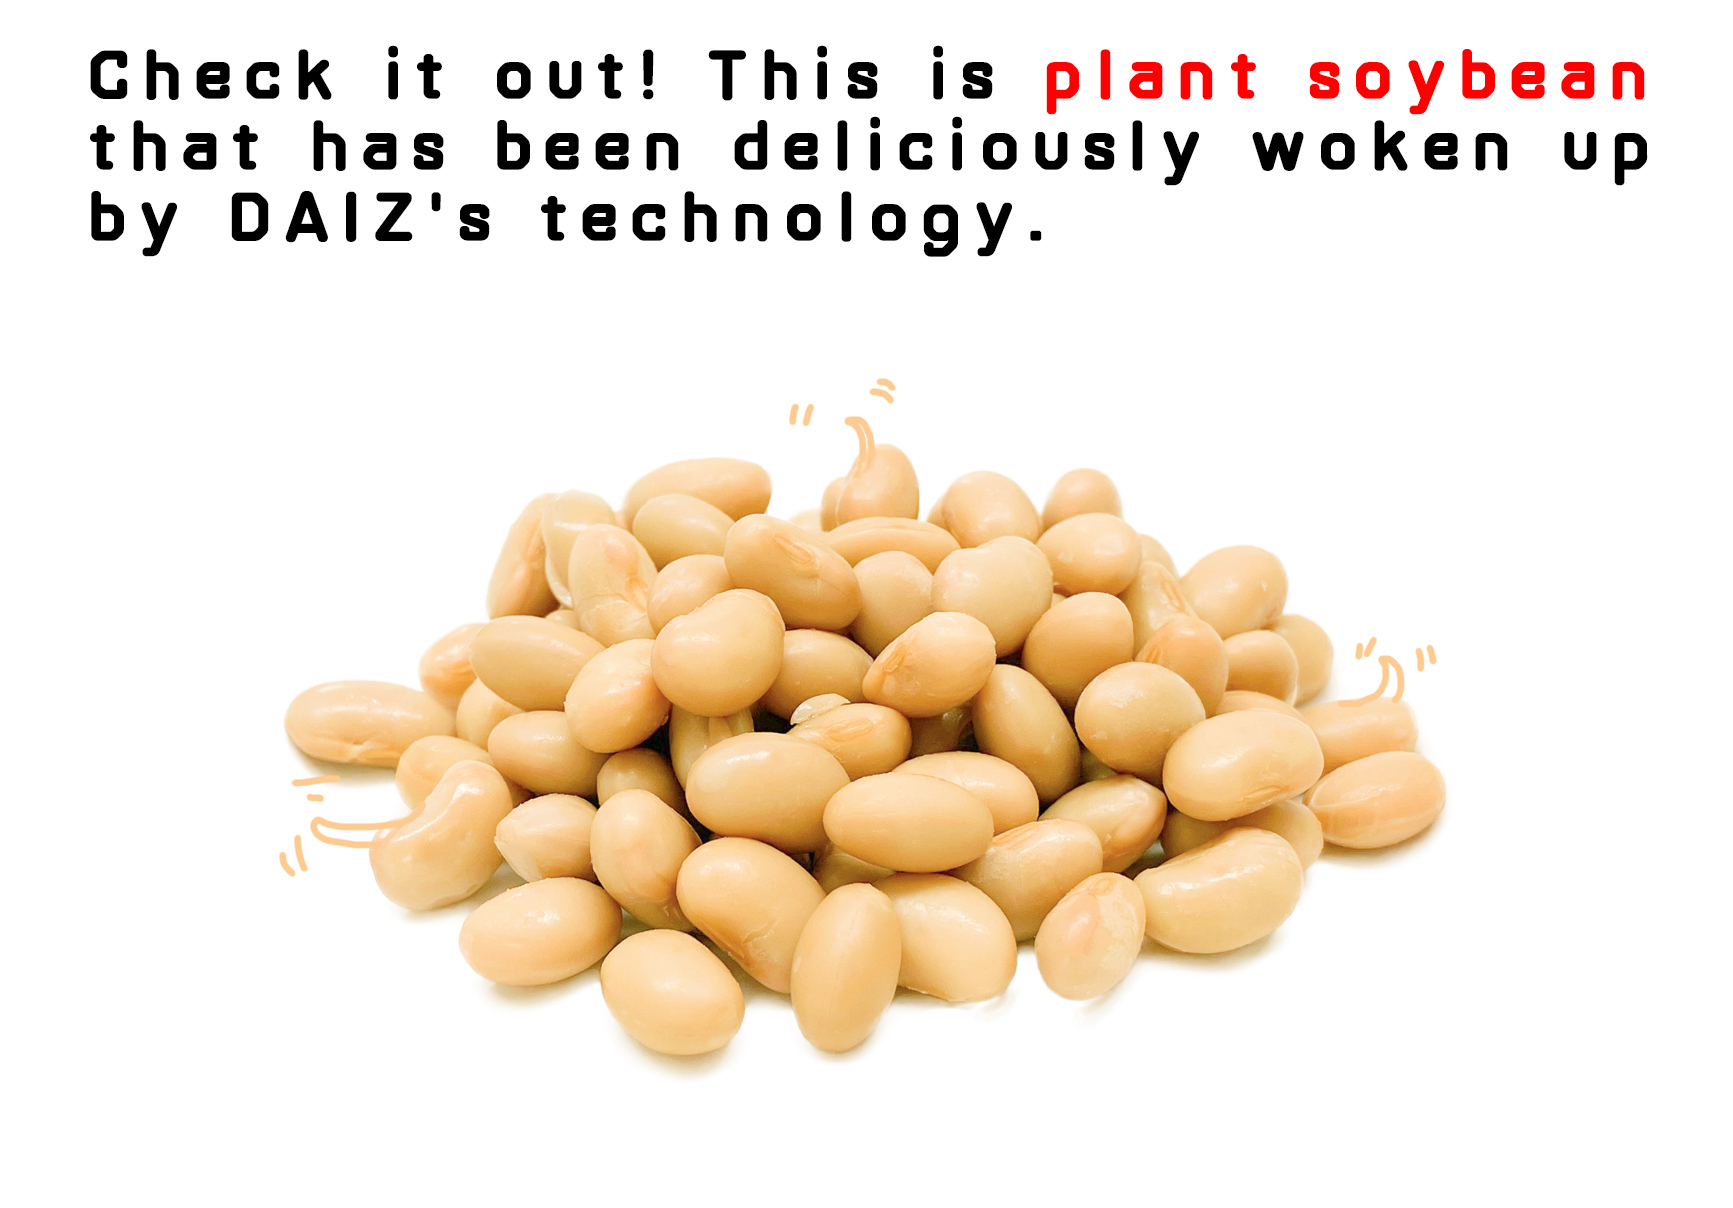 Check it out! This is plant soybean that has been deliciously woken Up by DAlZ's technology.